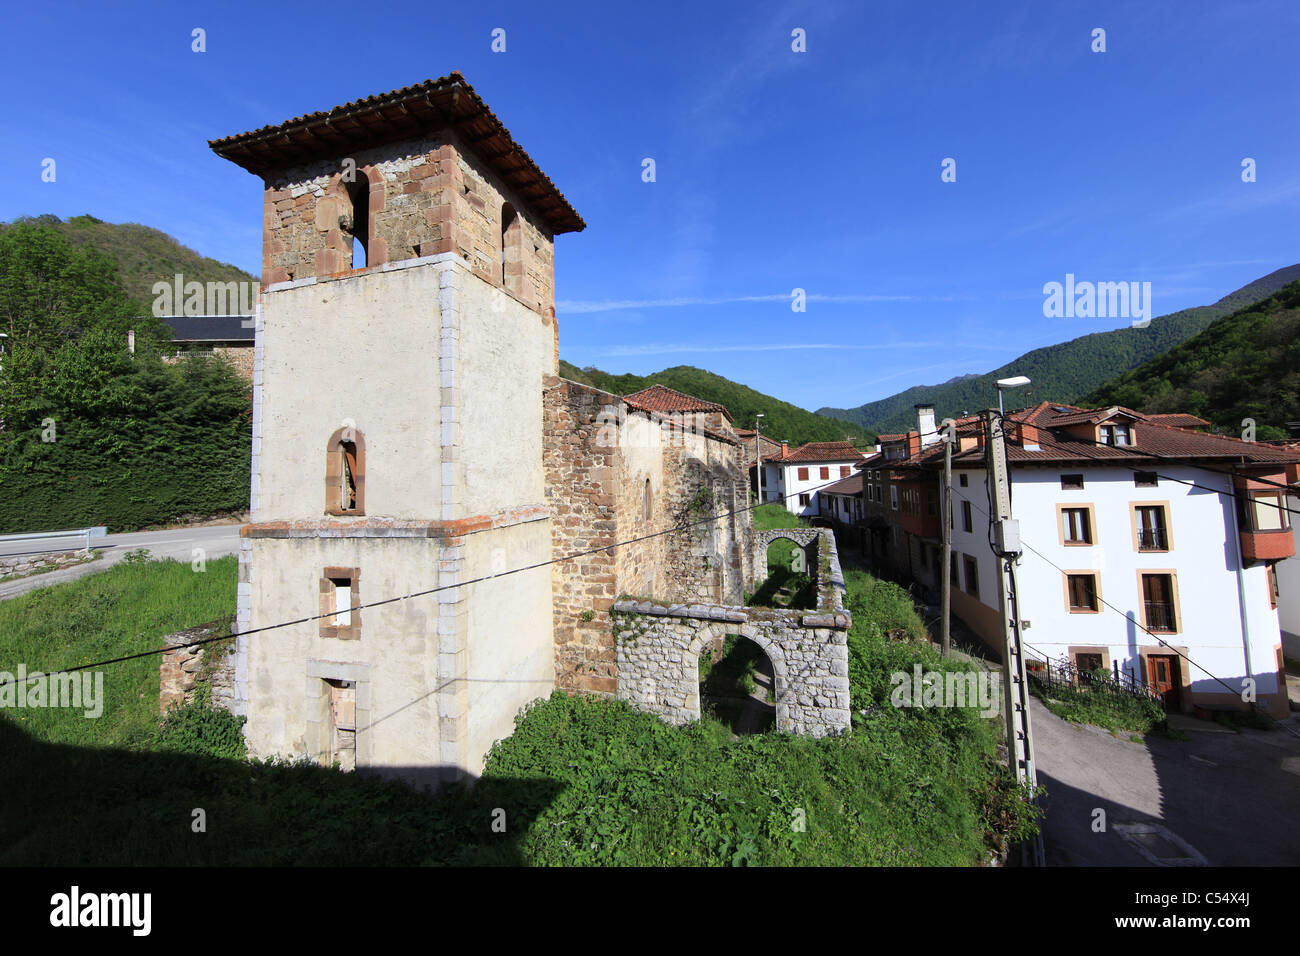 Semi-derelict church with tower in Espinama, Cantabria, Spain Stock Photo